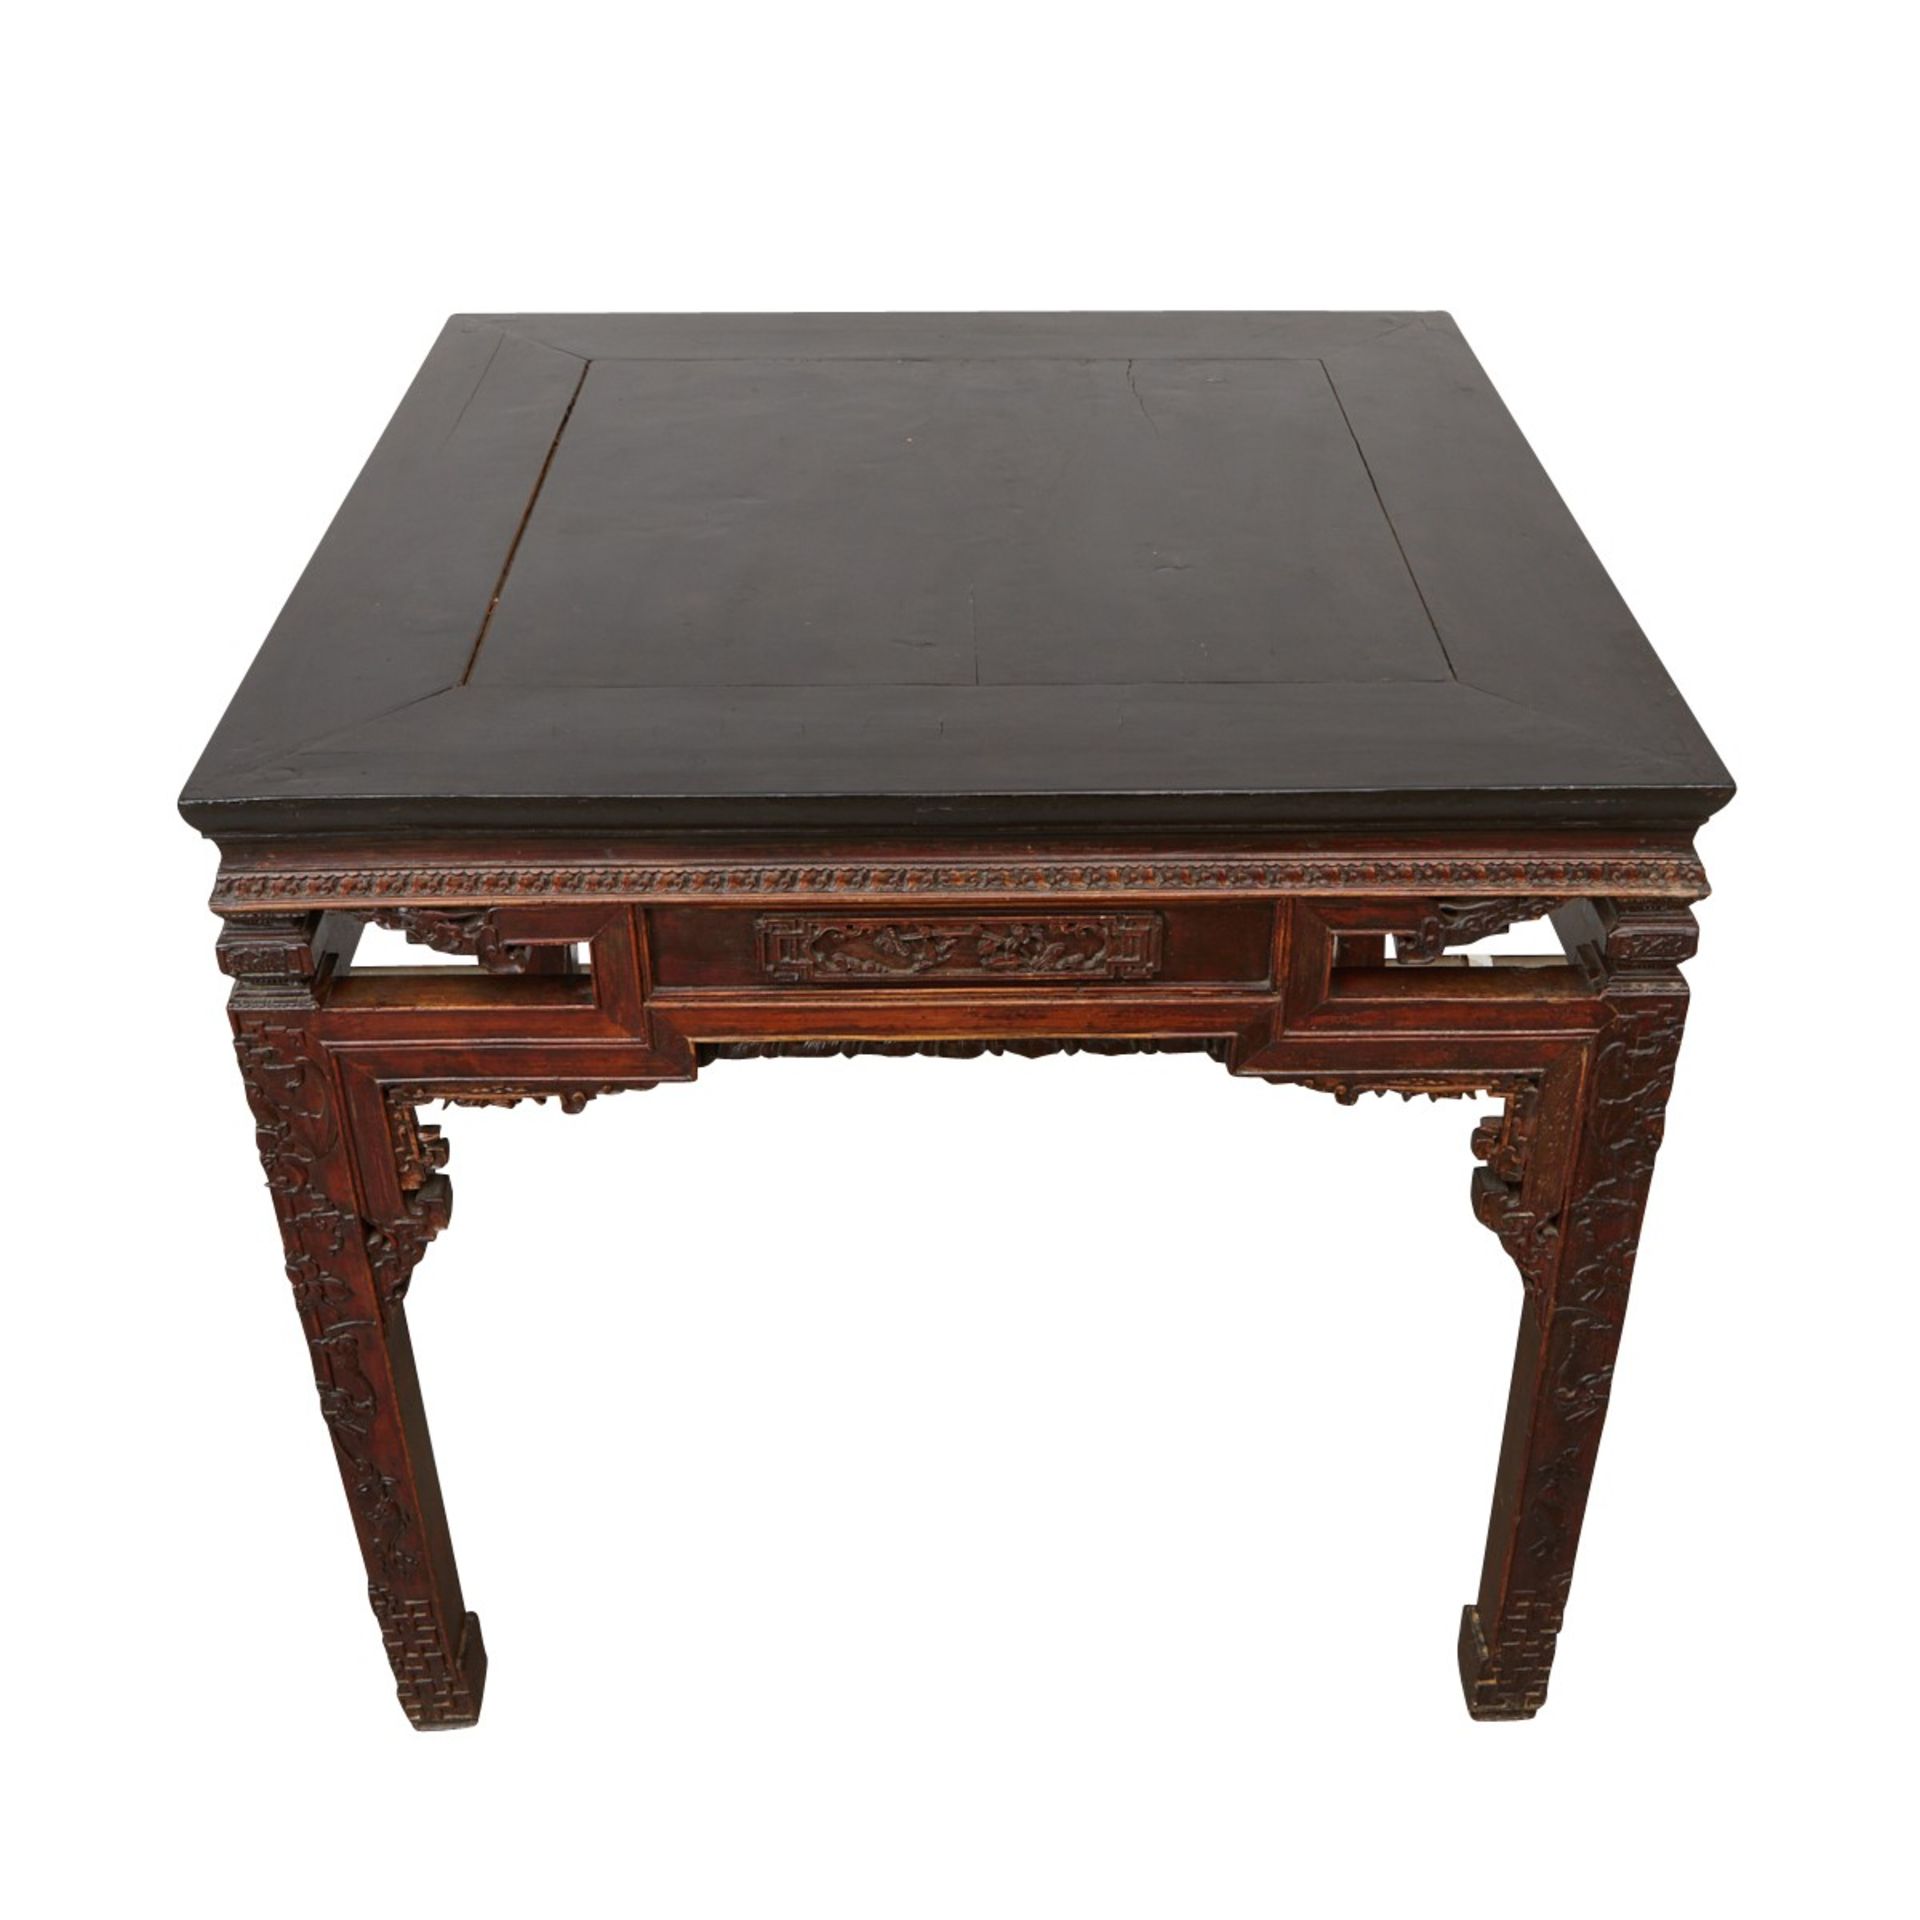 Chinese 19th c. Carved Wood Square Table - Image 3 of 11